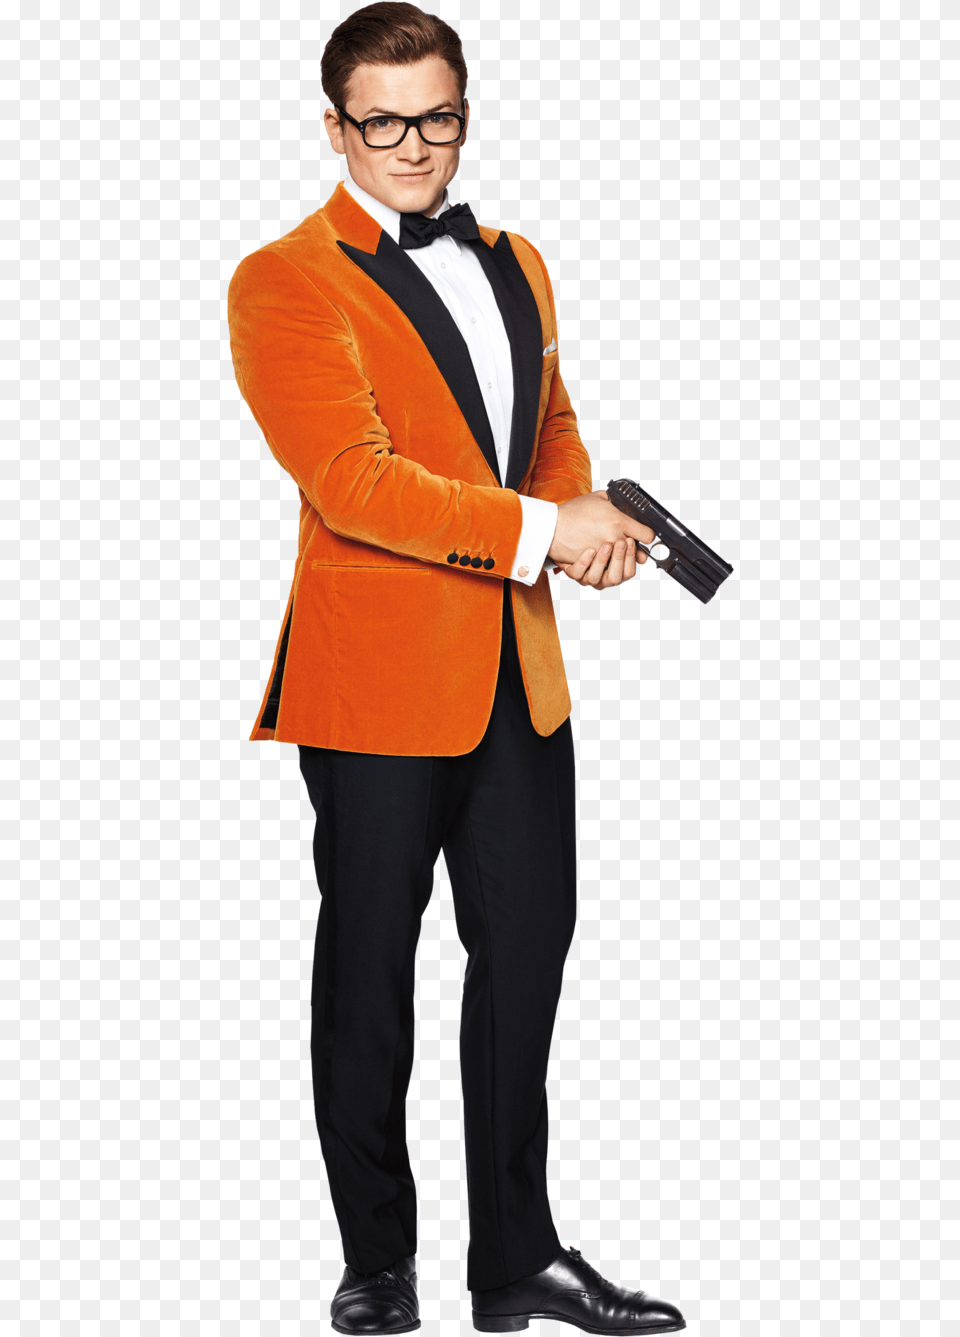 Golden Circle Eggsy Hd Kingsman The Golden Circle Suits, Weapon, Tuxedo, Suit, Jacket Free Png